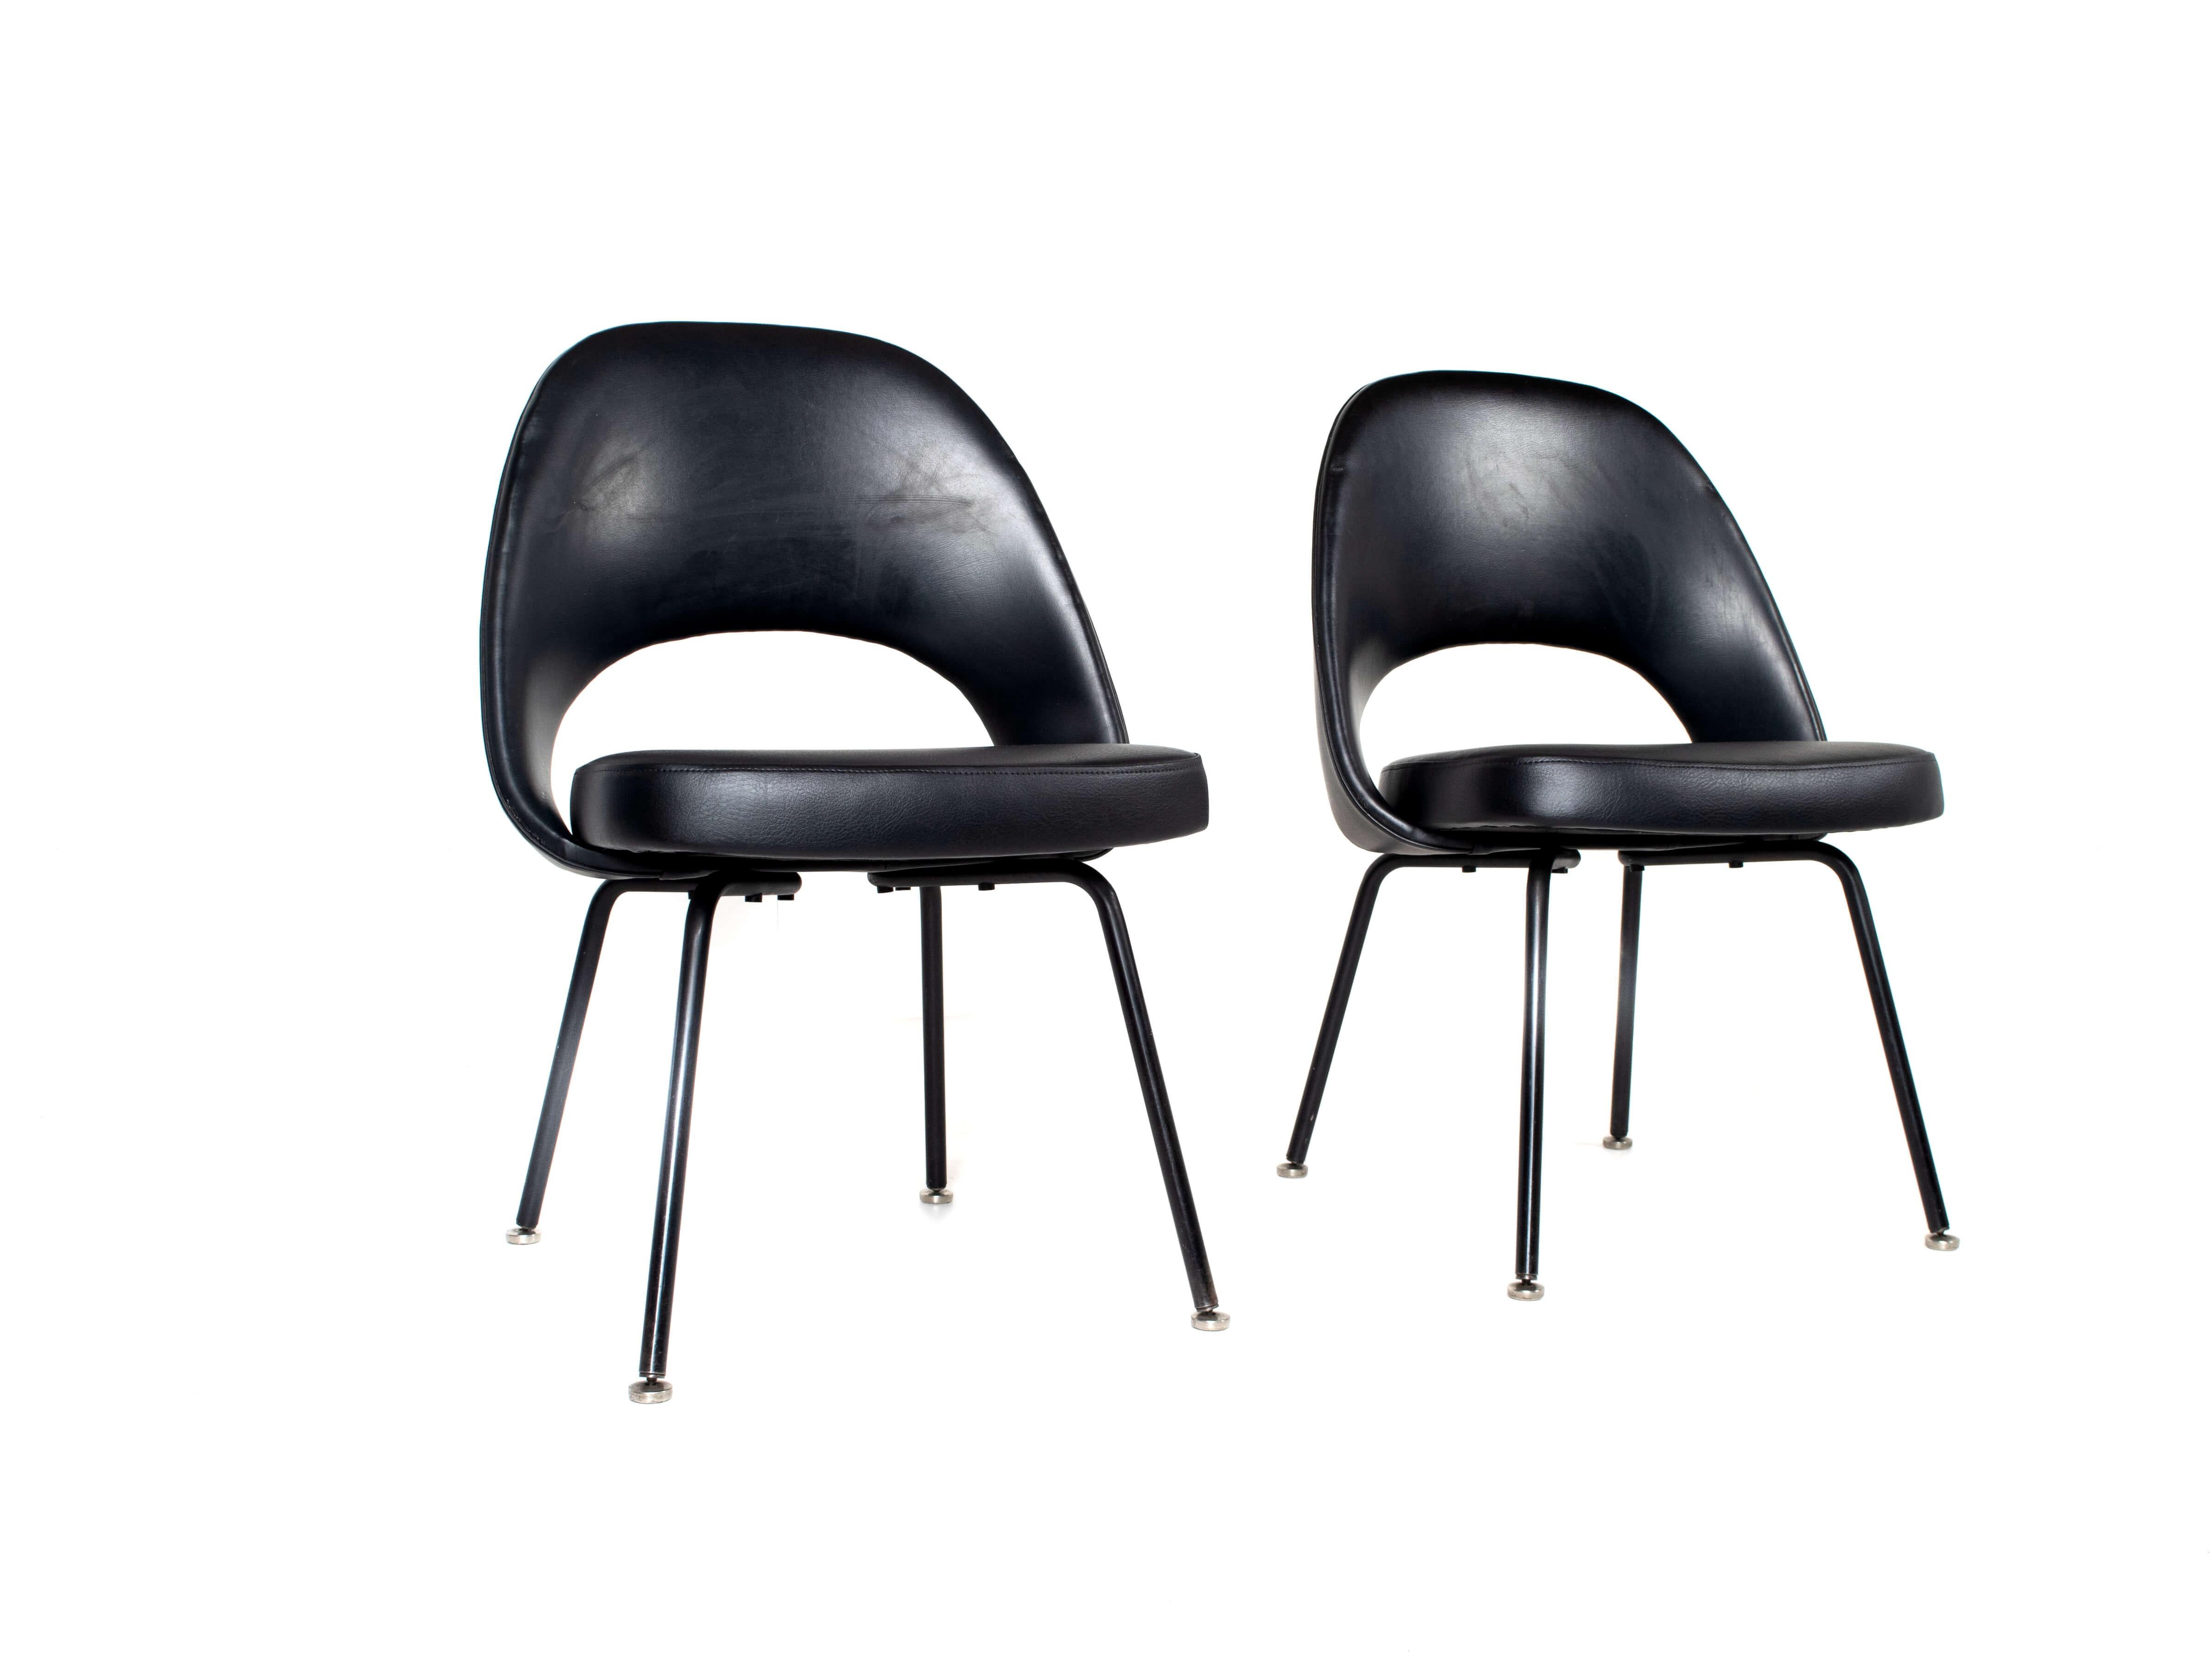 Set of two Eero Saarinen executive chairs for Knoll De Coene, Belgium 1950s. These chairs have black leather upholstery and black metal legs, finished with round feet. Both chairs are in good condition; one chair has a small dent in the leather as